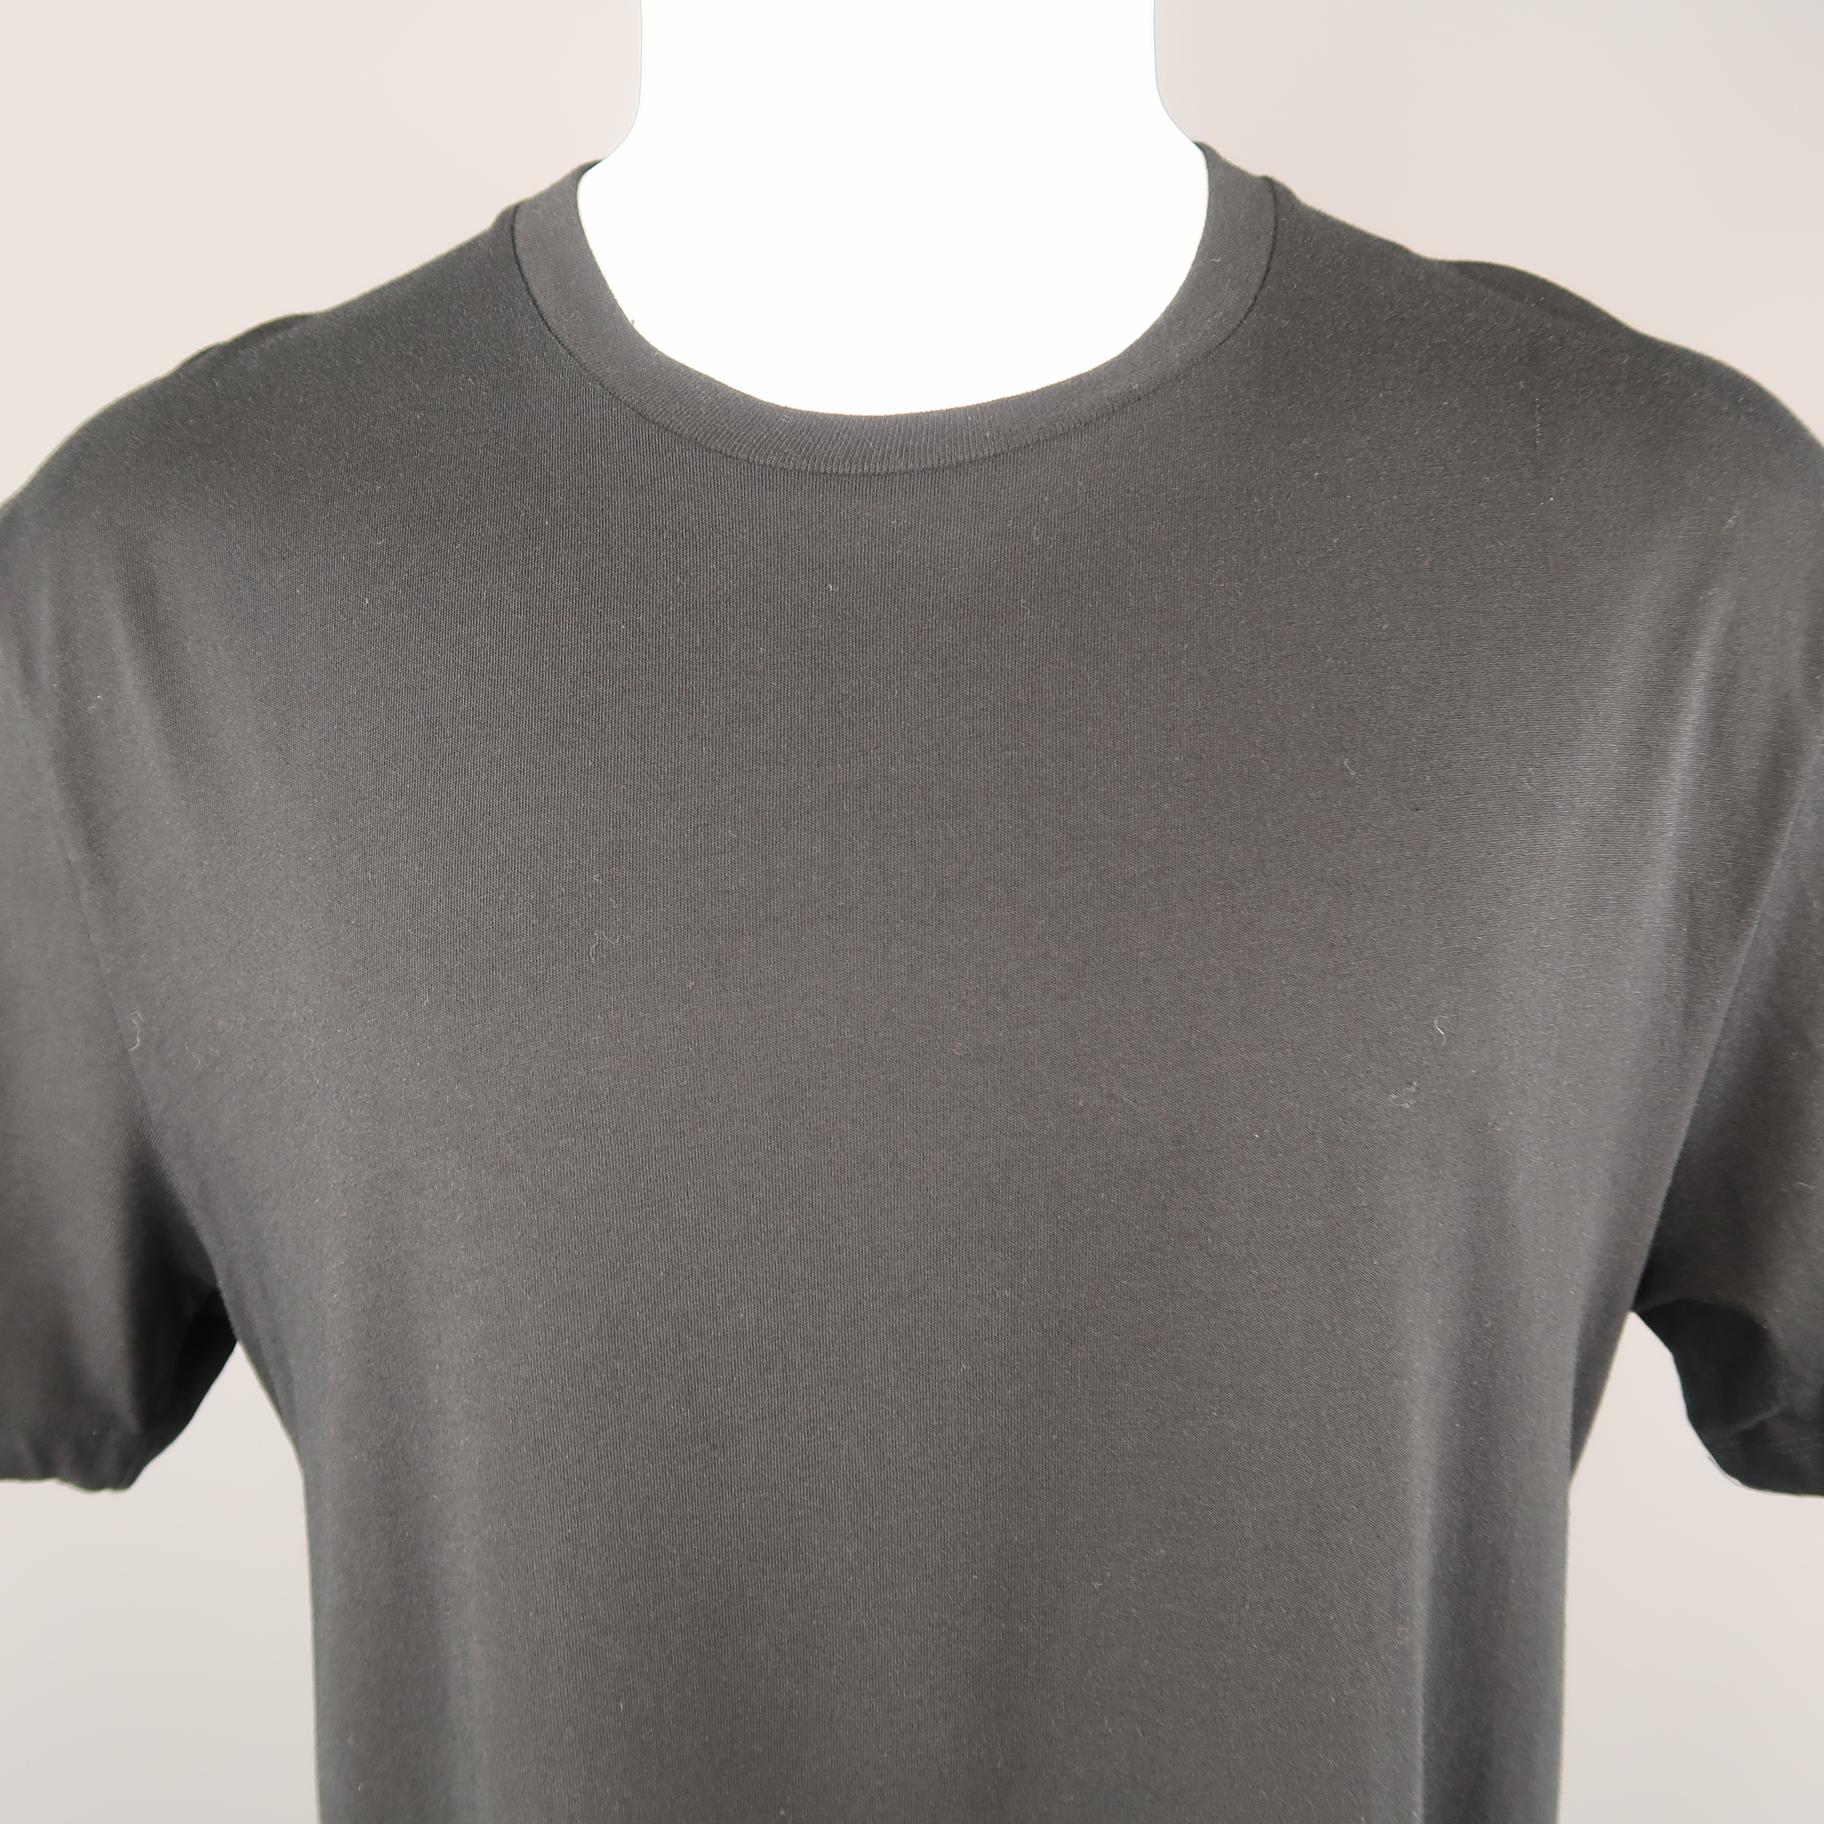 GAULTIER2 by JEAN PAUL GAULTIER oversized T shirt comes in black cotton jersey with short sleeves, crewneck, and high slit sides. Made in Italy.
 
Excellent Pre-Owned Condition.
Marked: XS
 
Measurements:
 
Shoulder: 21 in.
Chest: 46 in.
Sleeve: 9.5